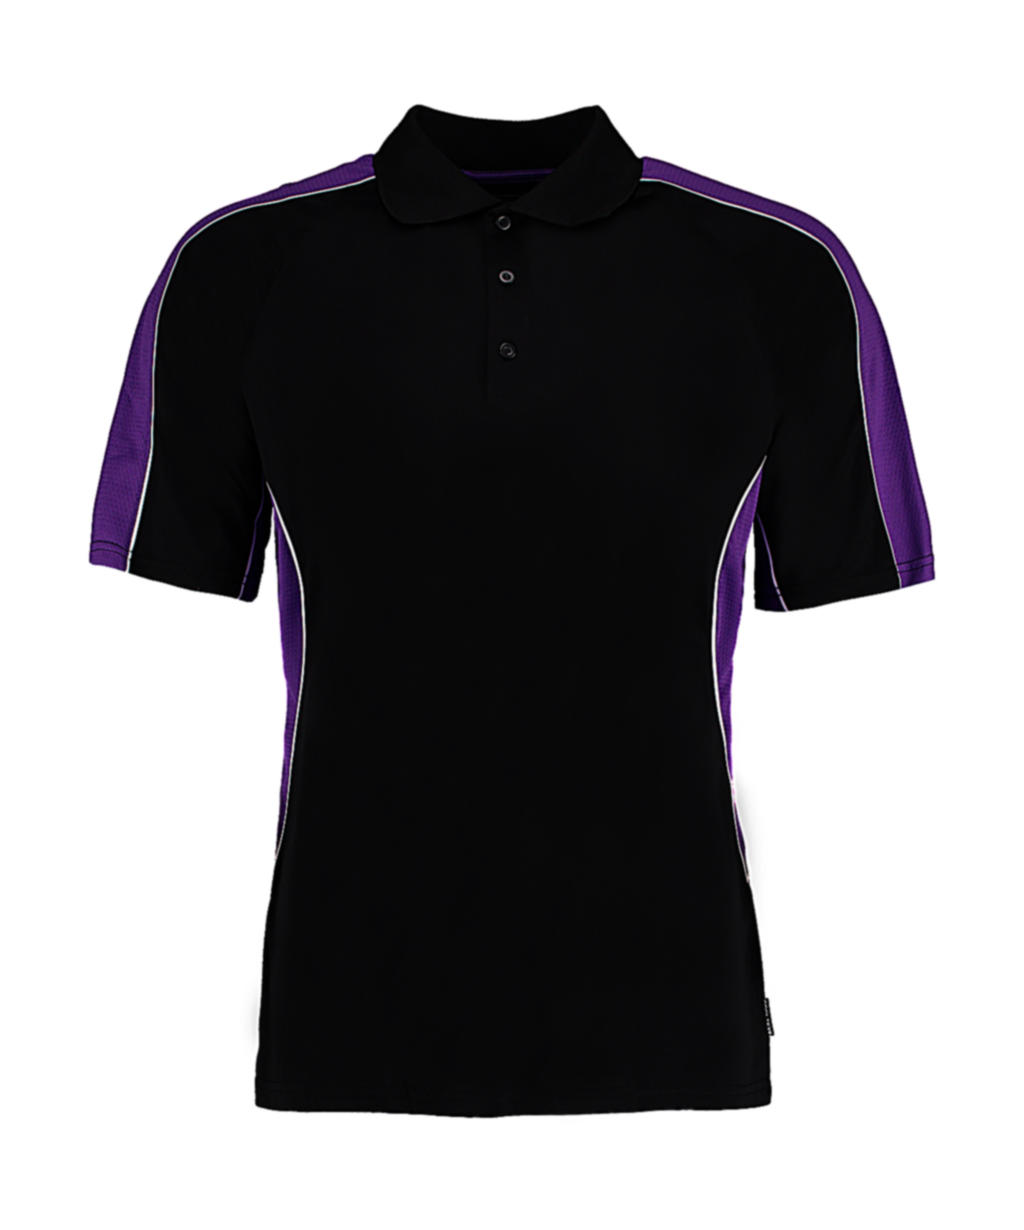  Classic Fit Cooltex? Contrast Polo Shirt in Farbe Black/Purple